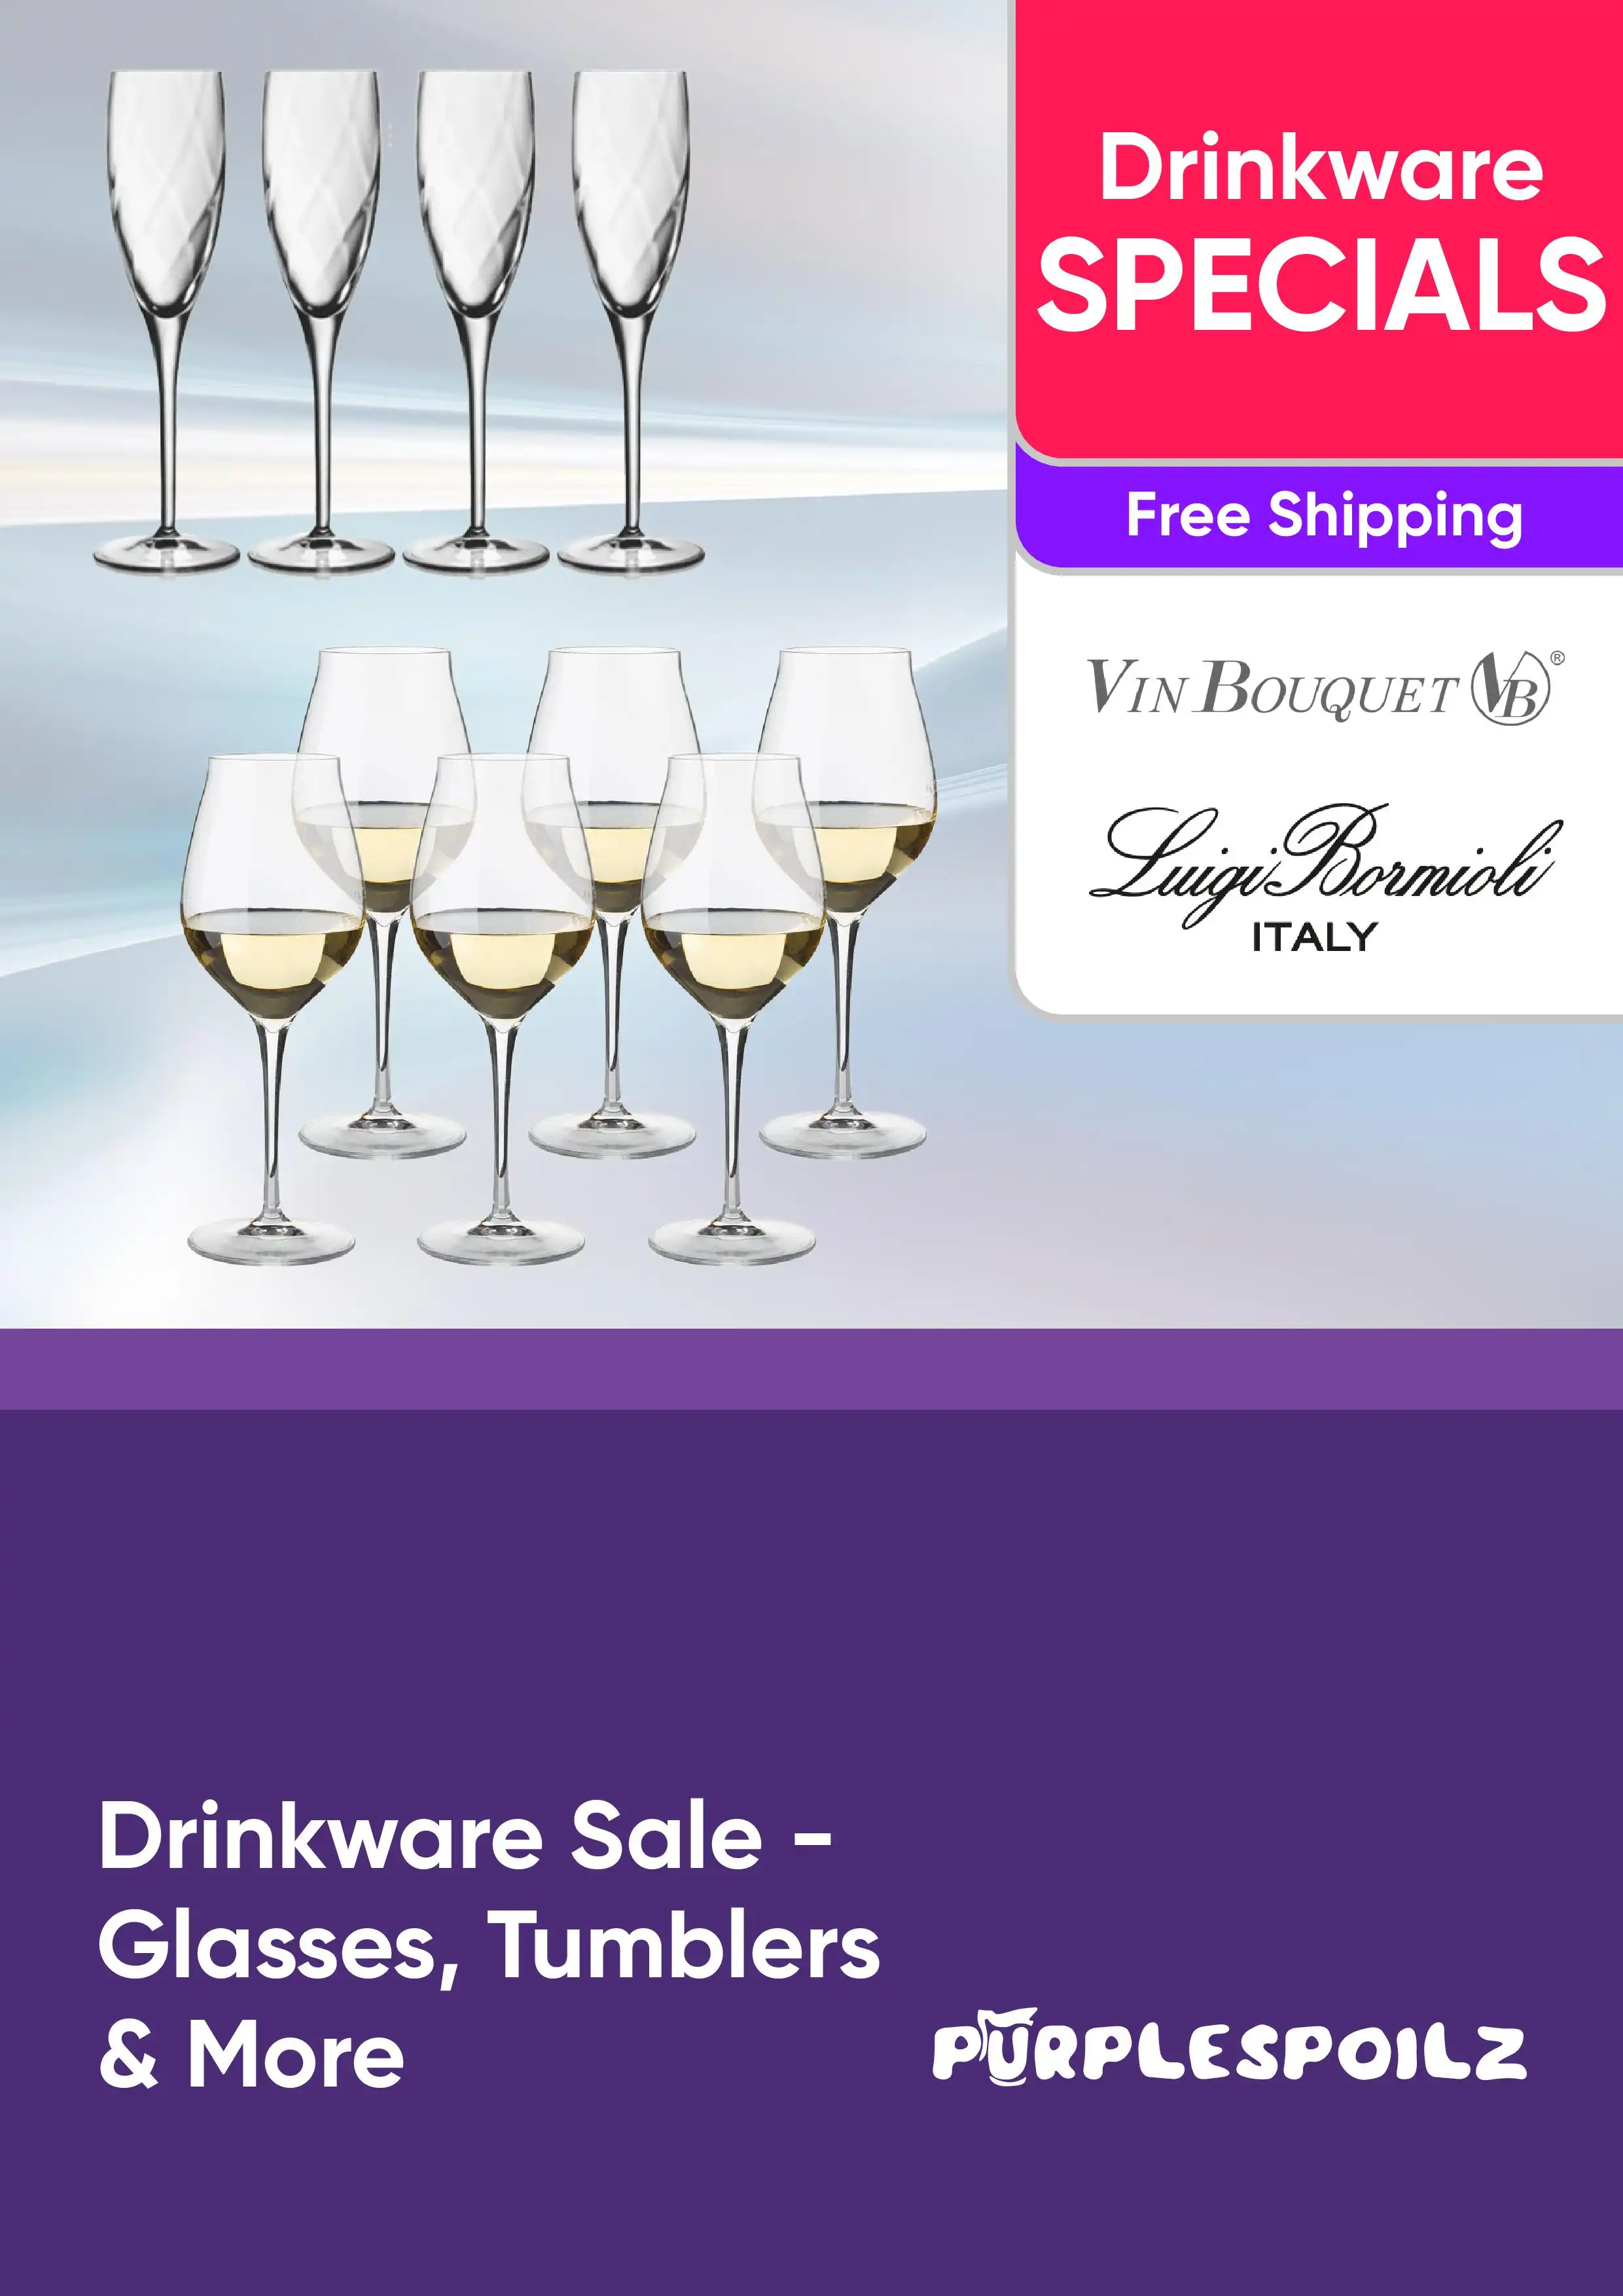 Drinkware Sale - Barware, Glasses, Tumblers and More - Free Shipping